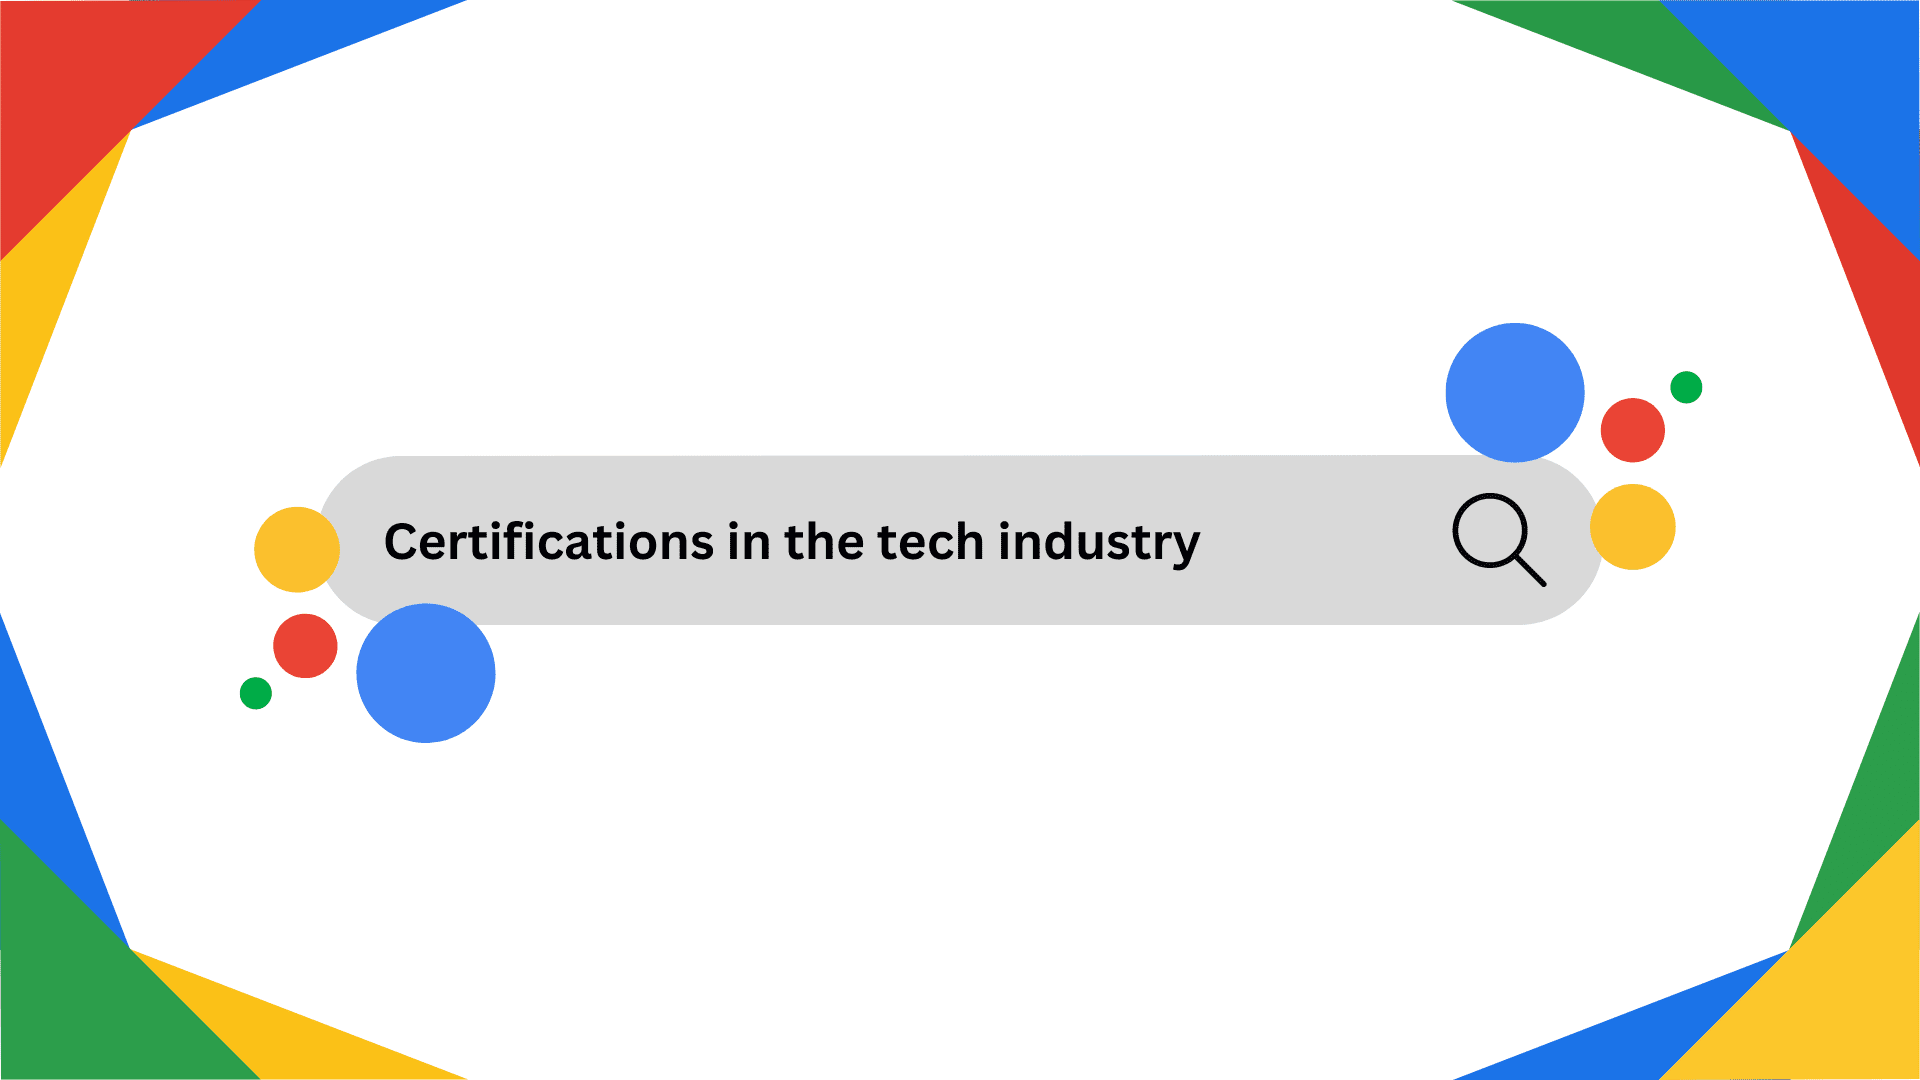 Popular Google Certifications across all areas of the technology industry